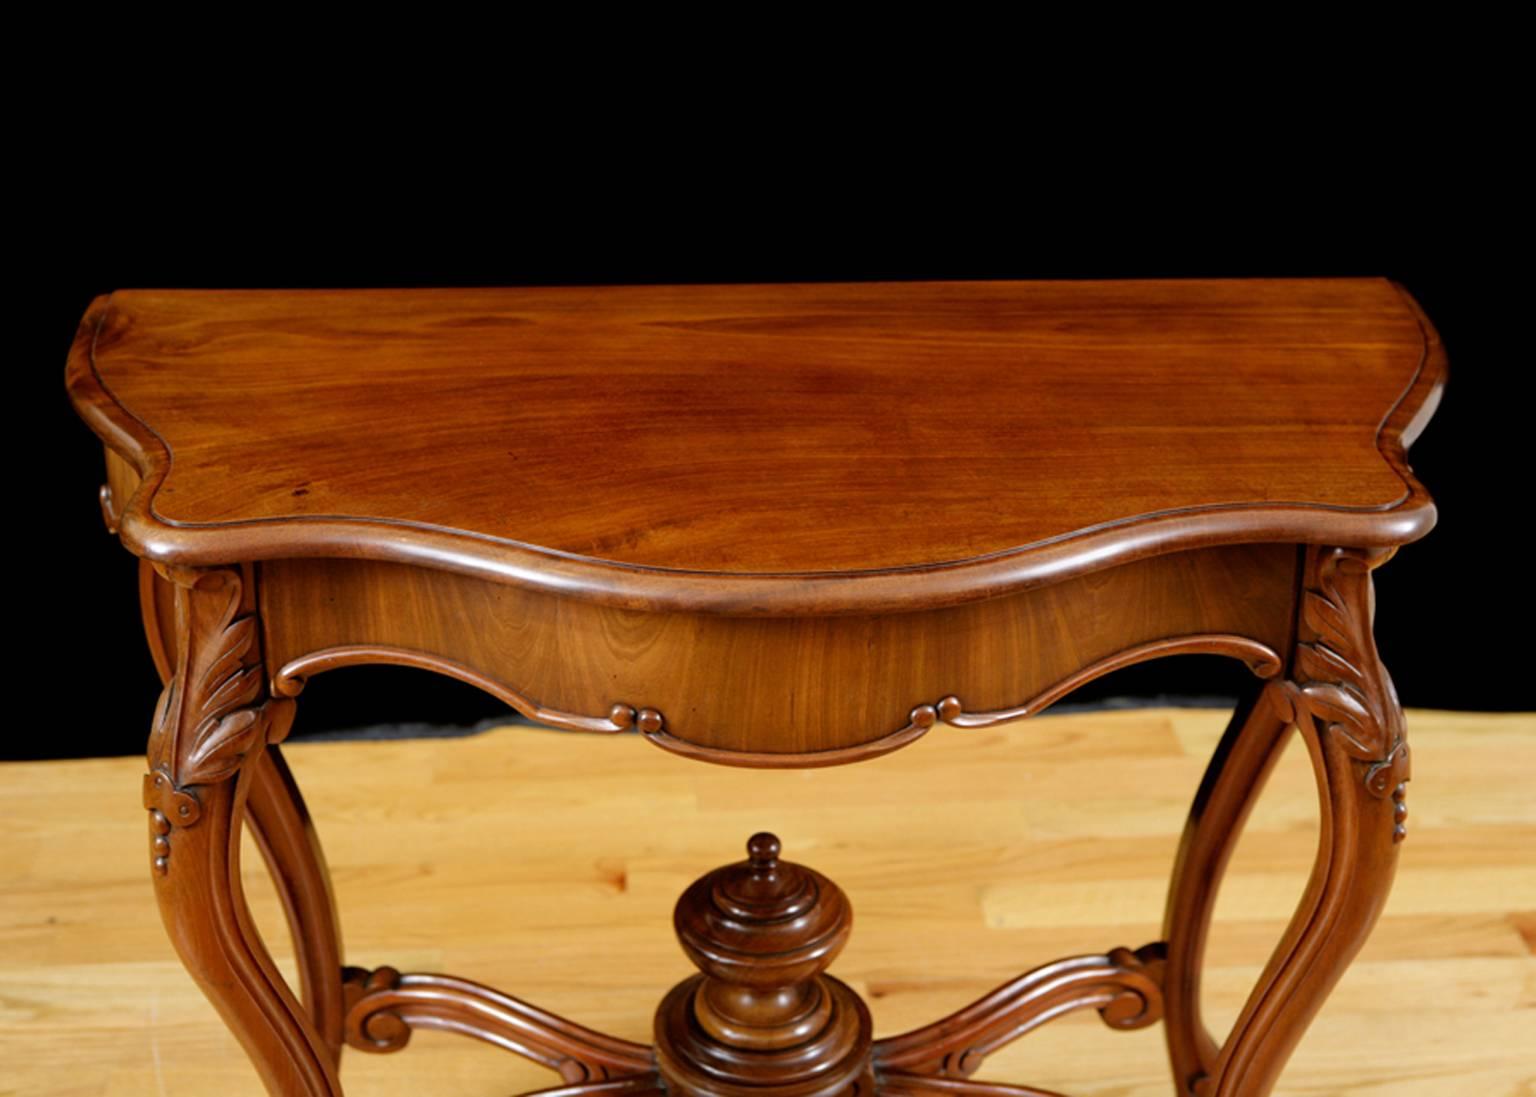 19th Century French Louis Philippe Console in Mahogany with Zinc-Lined Cellarette, circa 1830